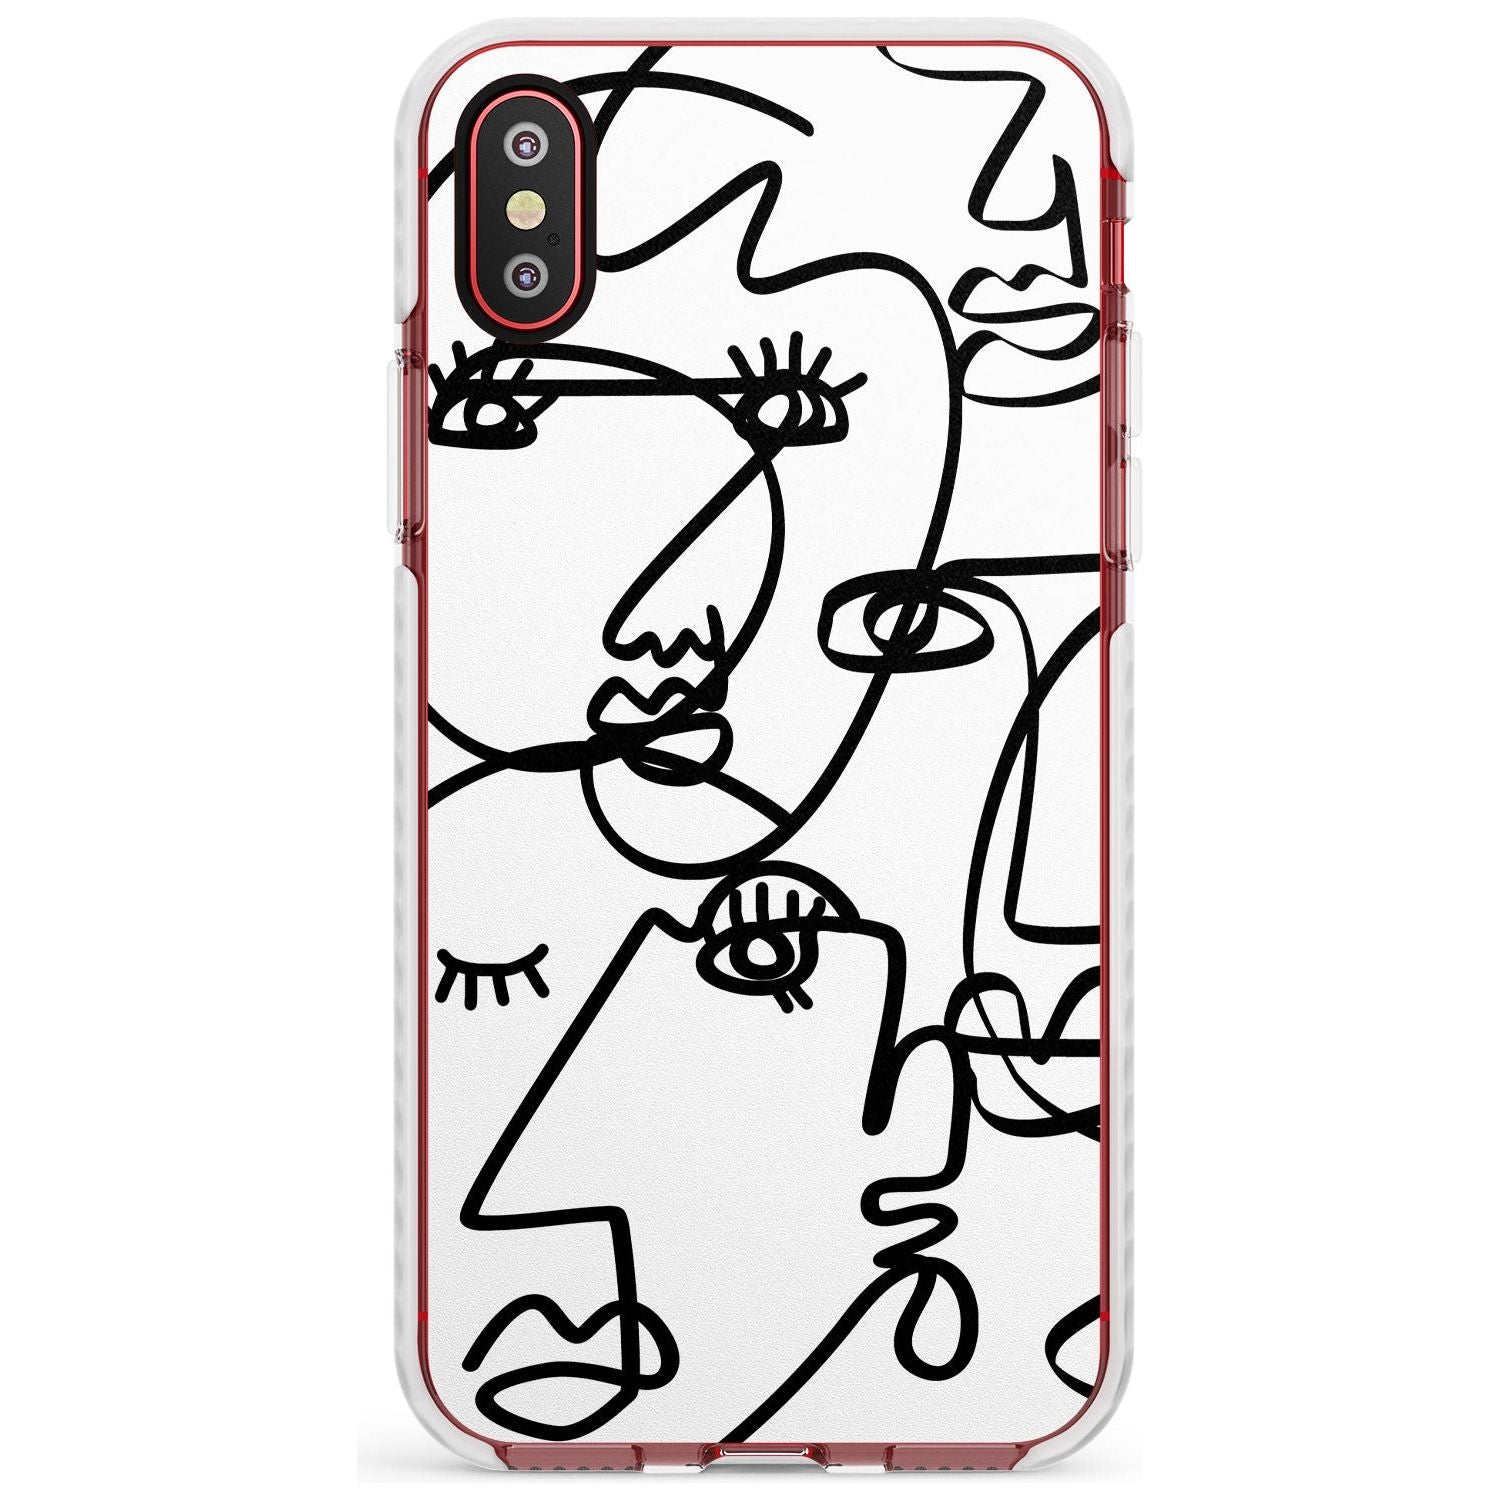 Continuous Line Faces: Black on White Slim TPU Phone Case Warehouse X XS Max XR